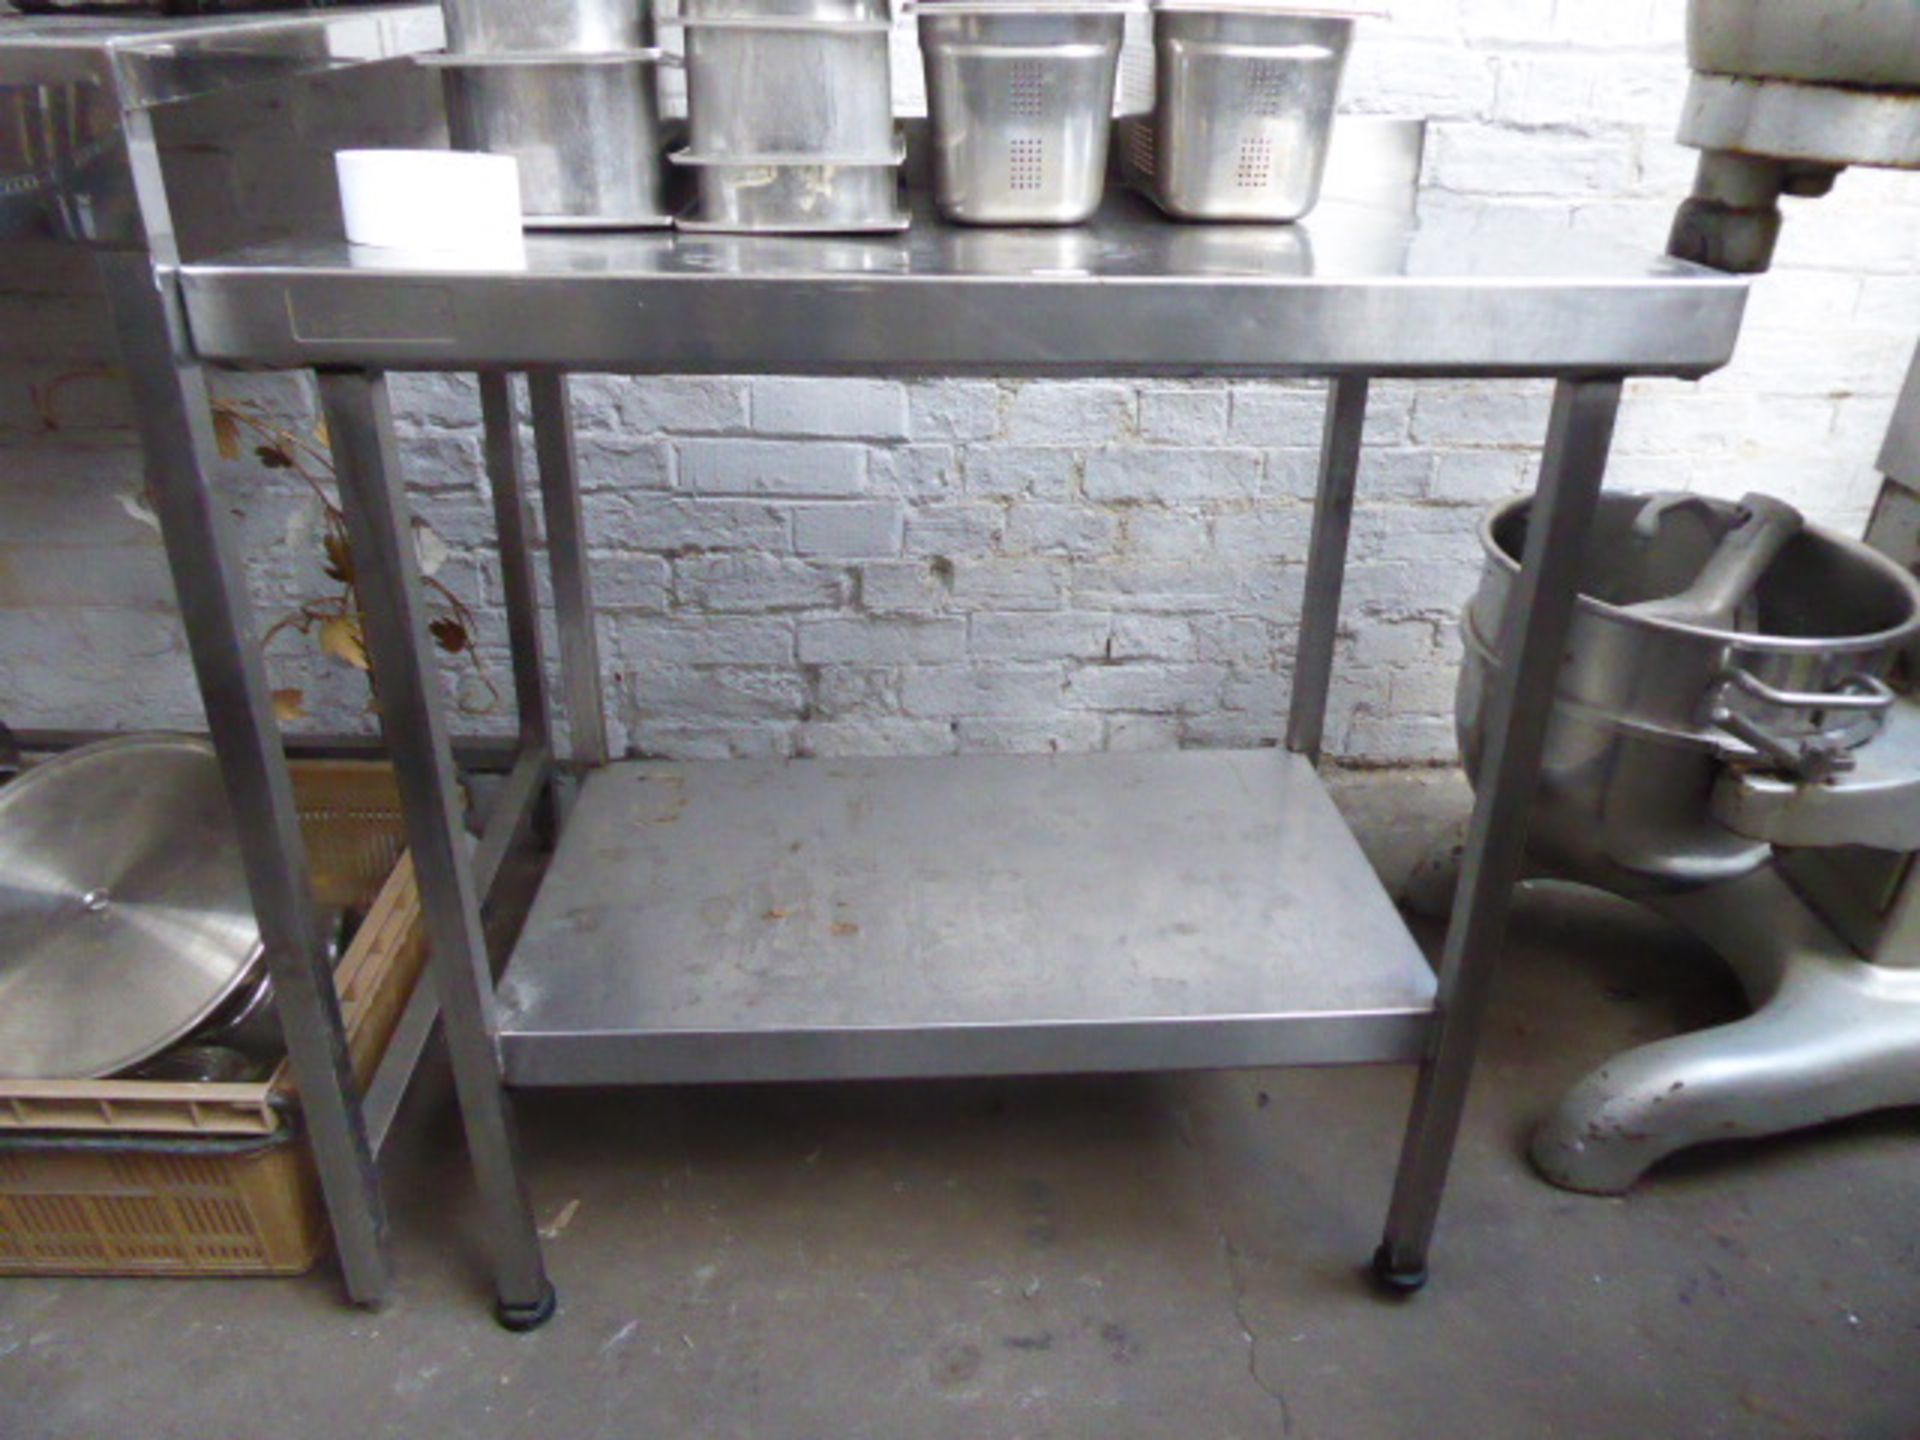 A 90cm stainless steel preparation table